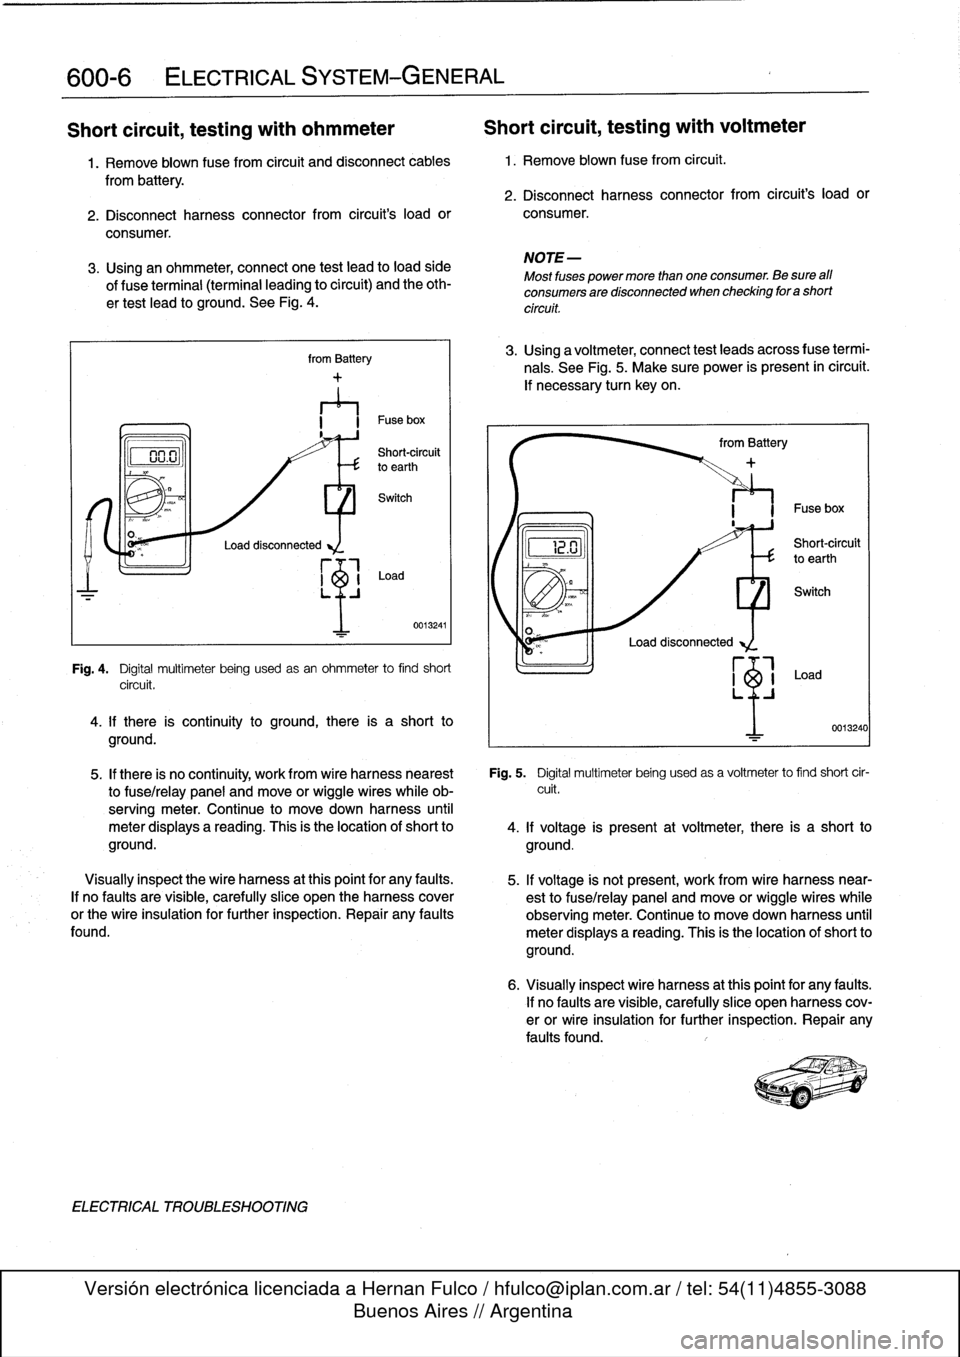 BMW M3 1993 E36 Workshop Manual 
00-
6

	

ELECTRICAL
SYSTEM-GENERAL

Short
circuit,
testing
with
ohmmeter

	

Short
circuit,
testing
with
voltmeter

1
.
Remove
blown
fuse
from
circuit
and
disconnect
cables

	

1
.
Remove
blown
fuse